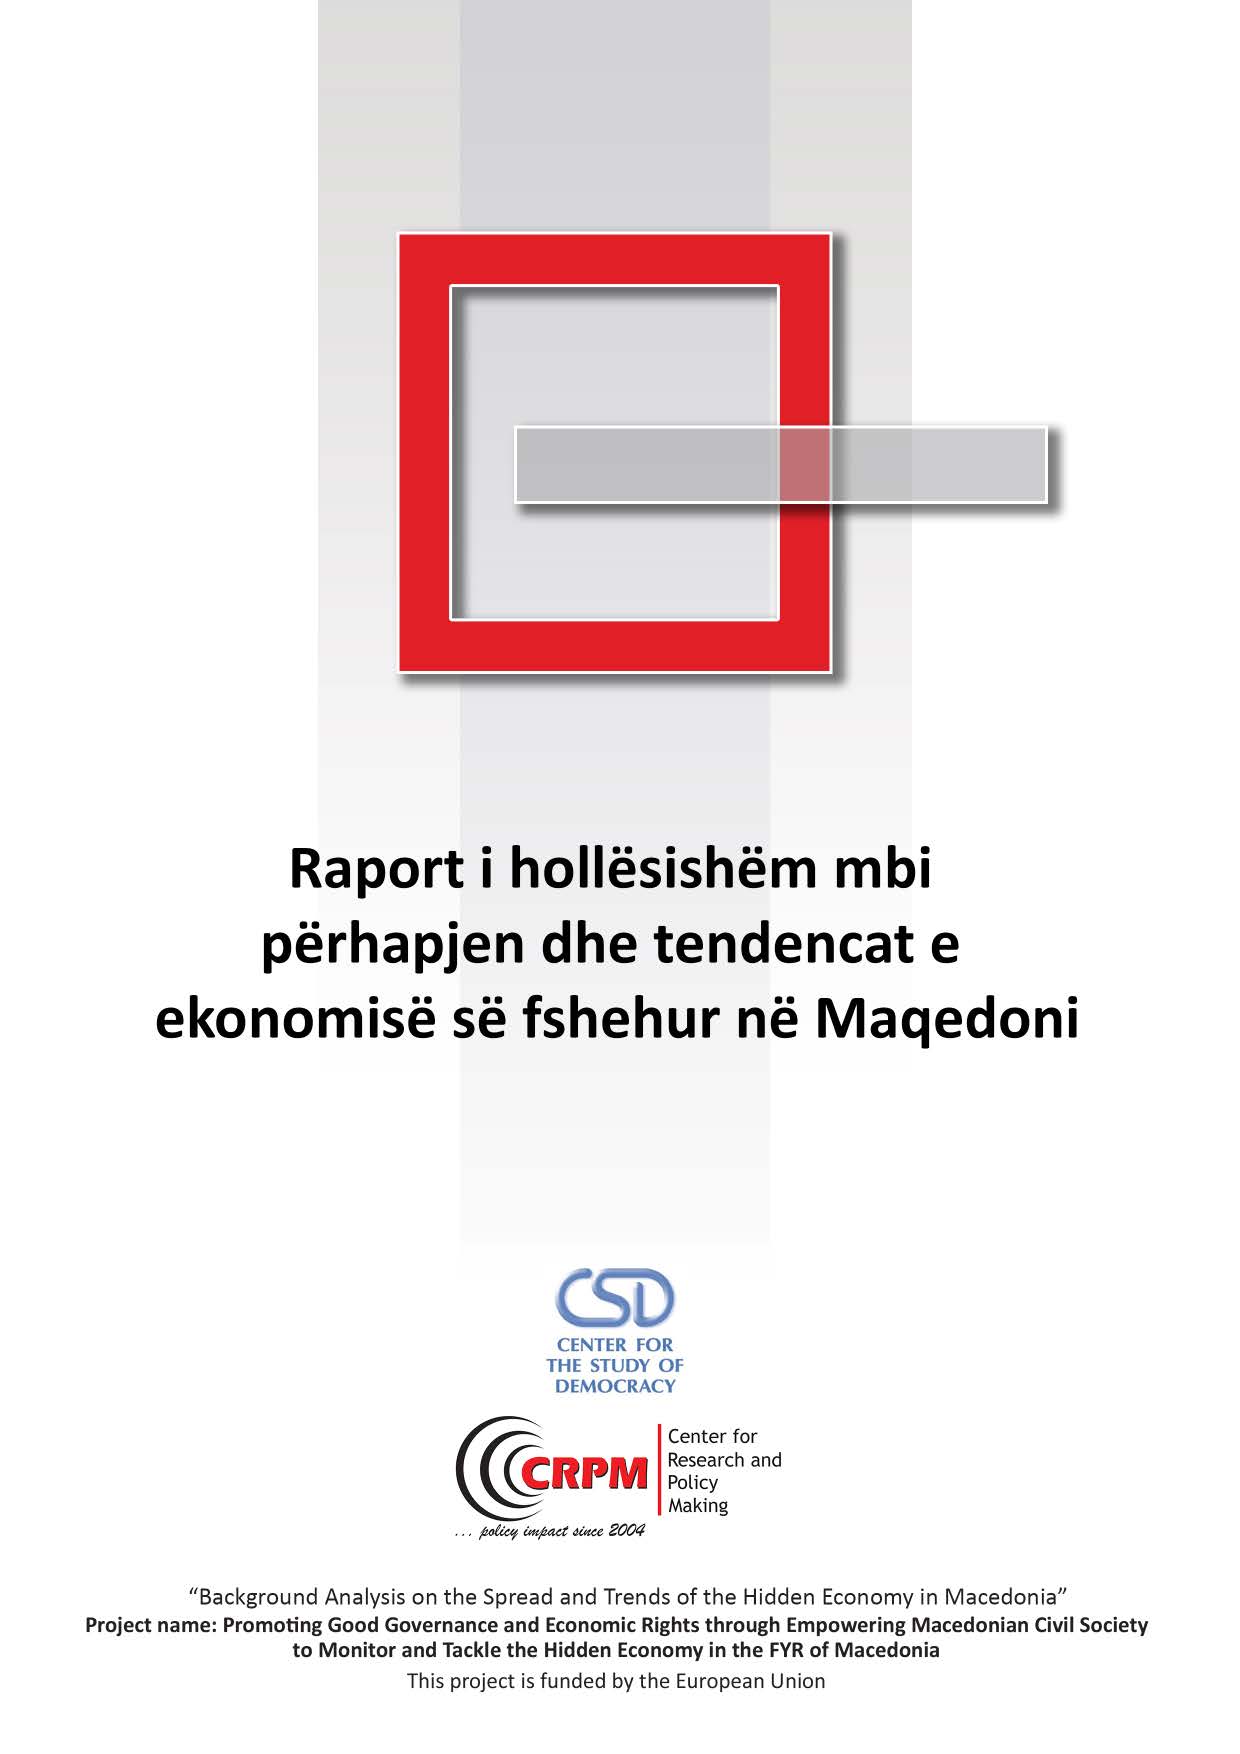 Background Analysis on the Spread and Trends of Hidden Economy in Macedonia